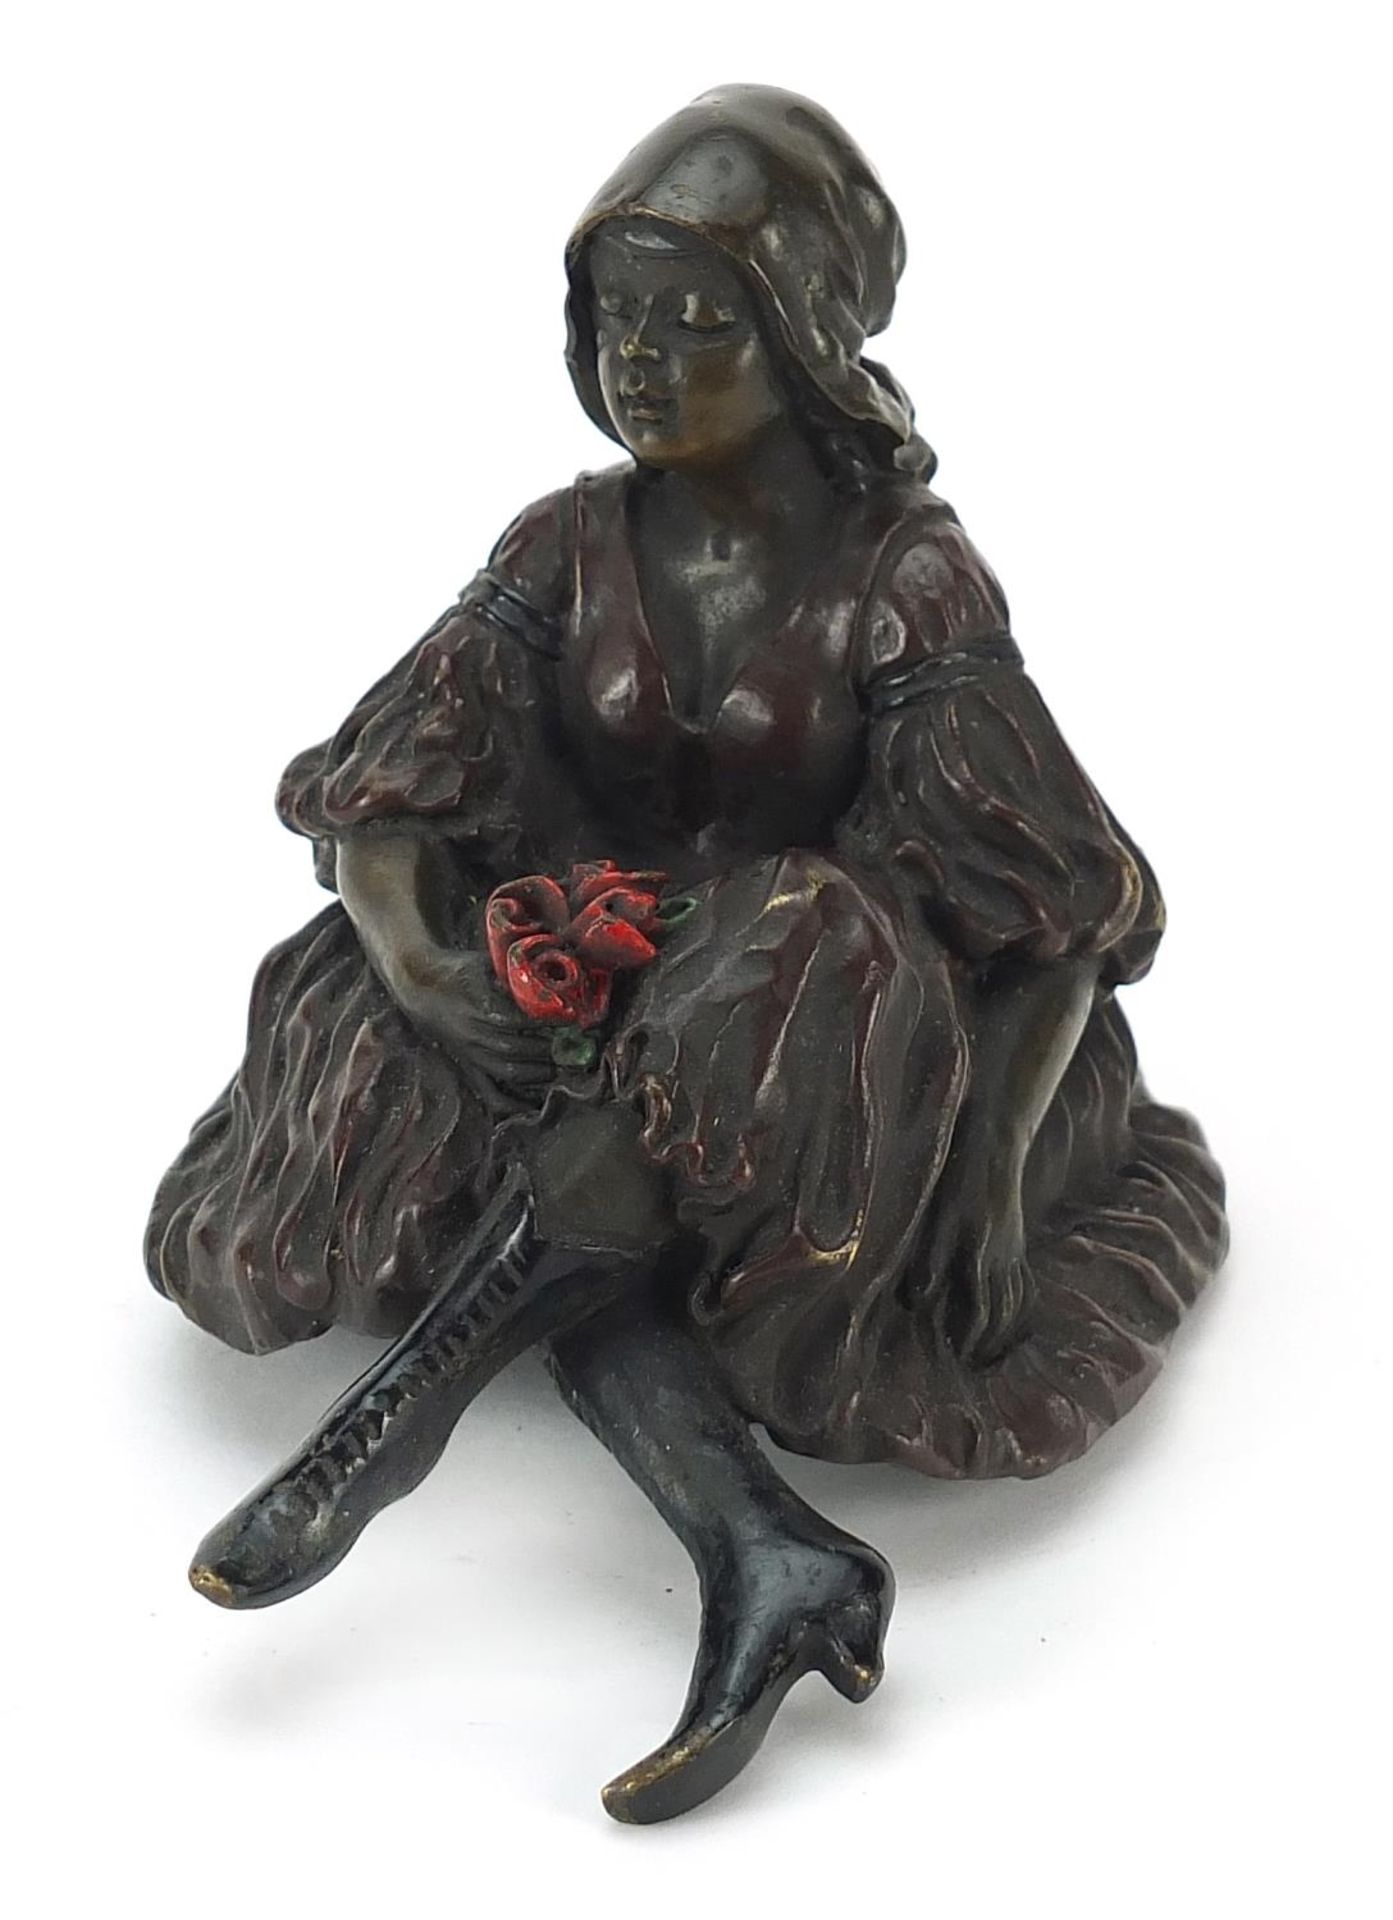 Cold painted bronze erotic figurine seated in a dress, 11cm in length